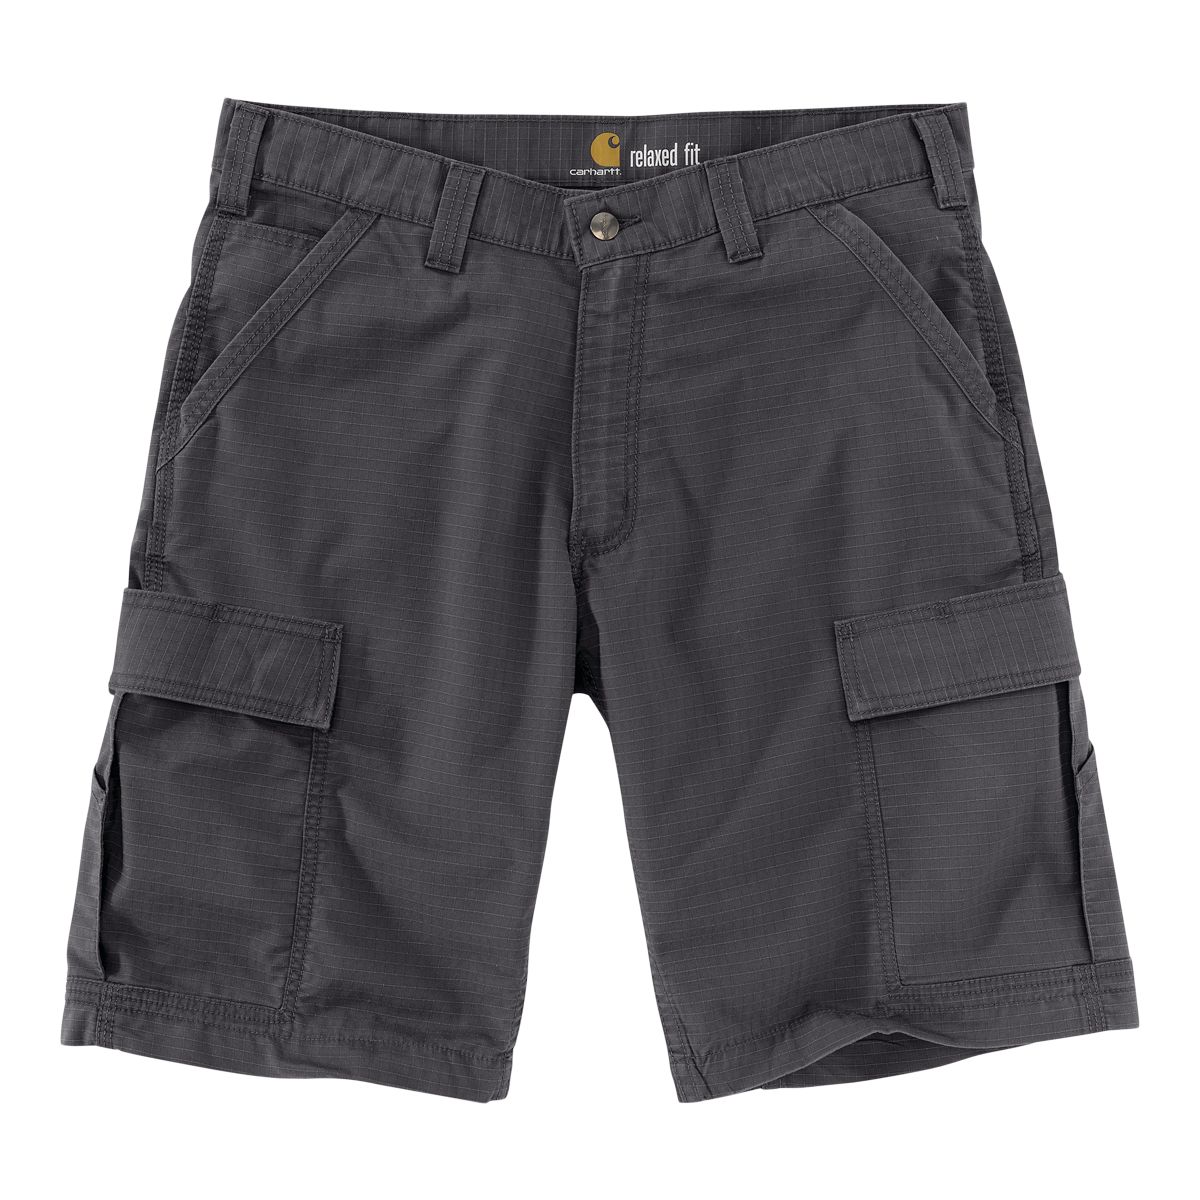 Clearance RYRJJ Relaxed Fit Cargo Shorts for Men Casual Multi-Pocket Zipper  Deco Shorts Outdoor Twill Lightweight Short Pants(Dark Gray,M) 